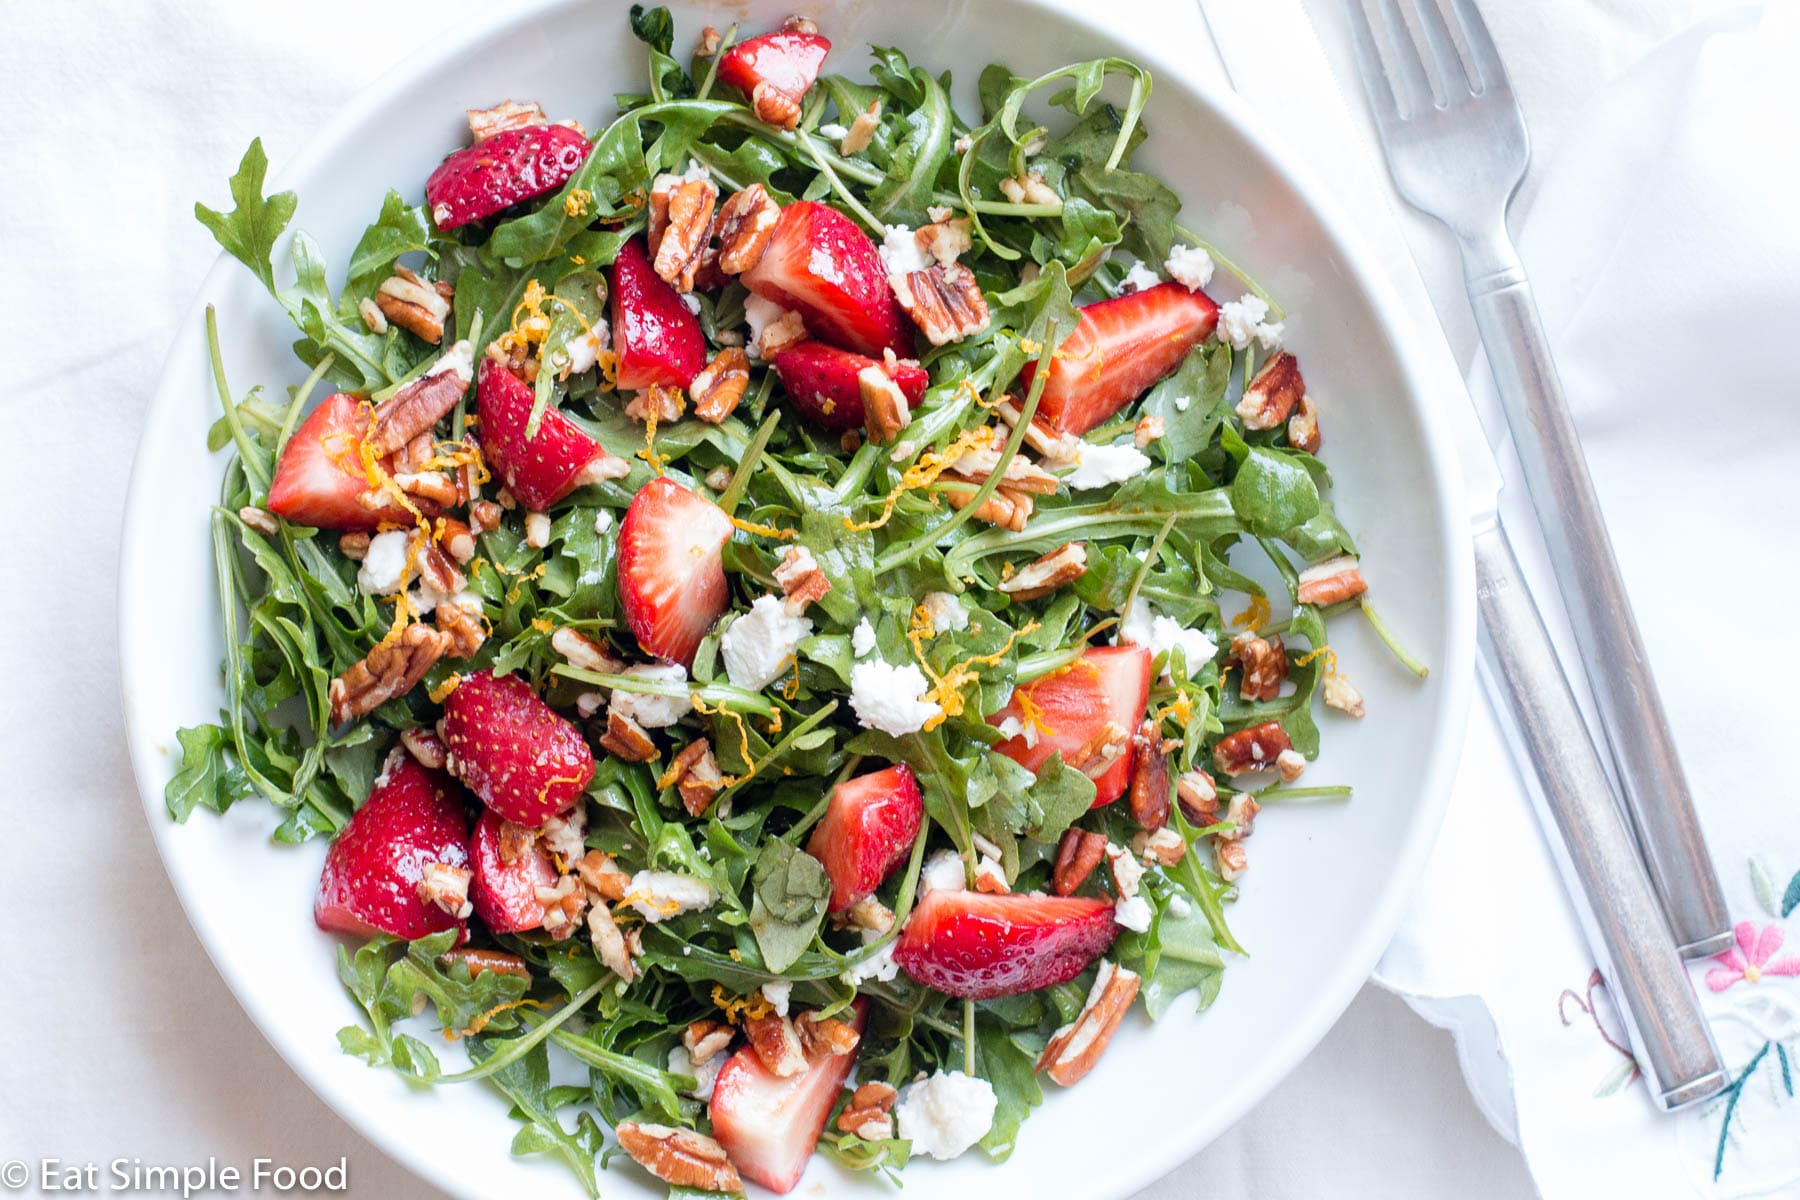 quartered strawberries, chopped pecans, and crumbled goat cheese on arugula salad on a shallow bowl/plate. top view.